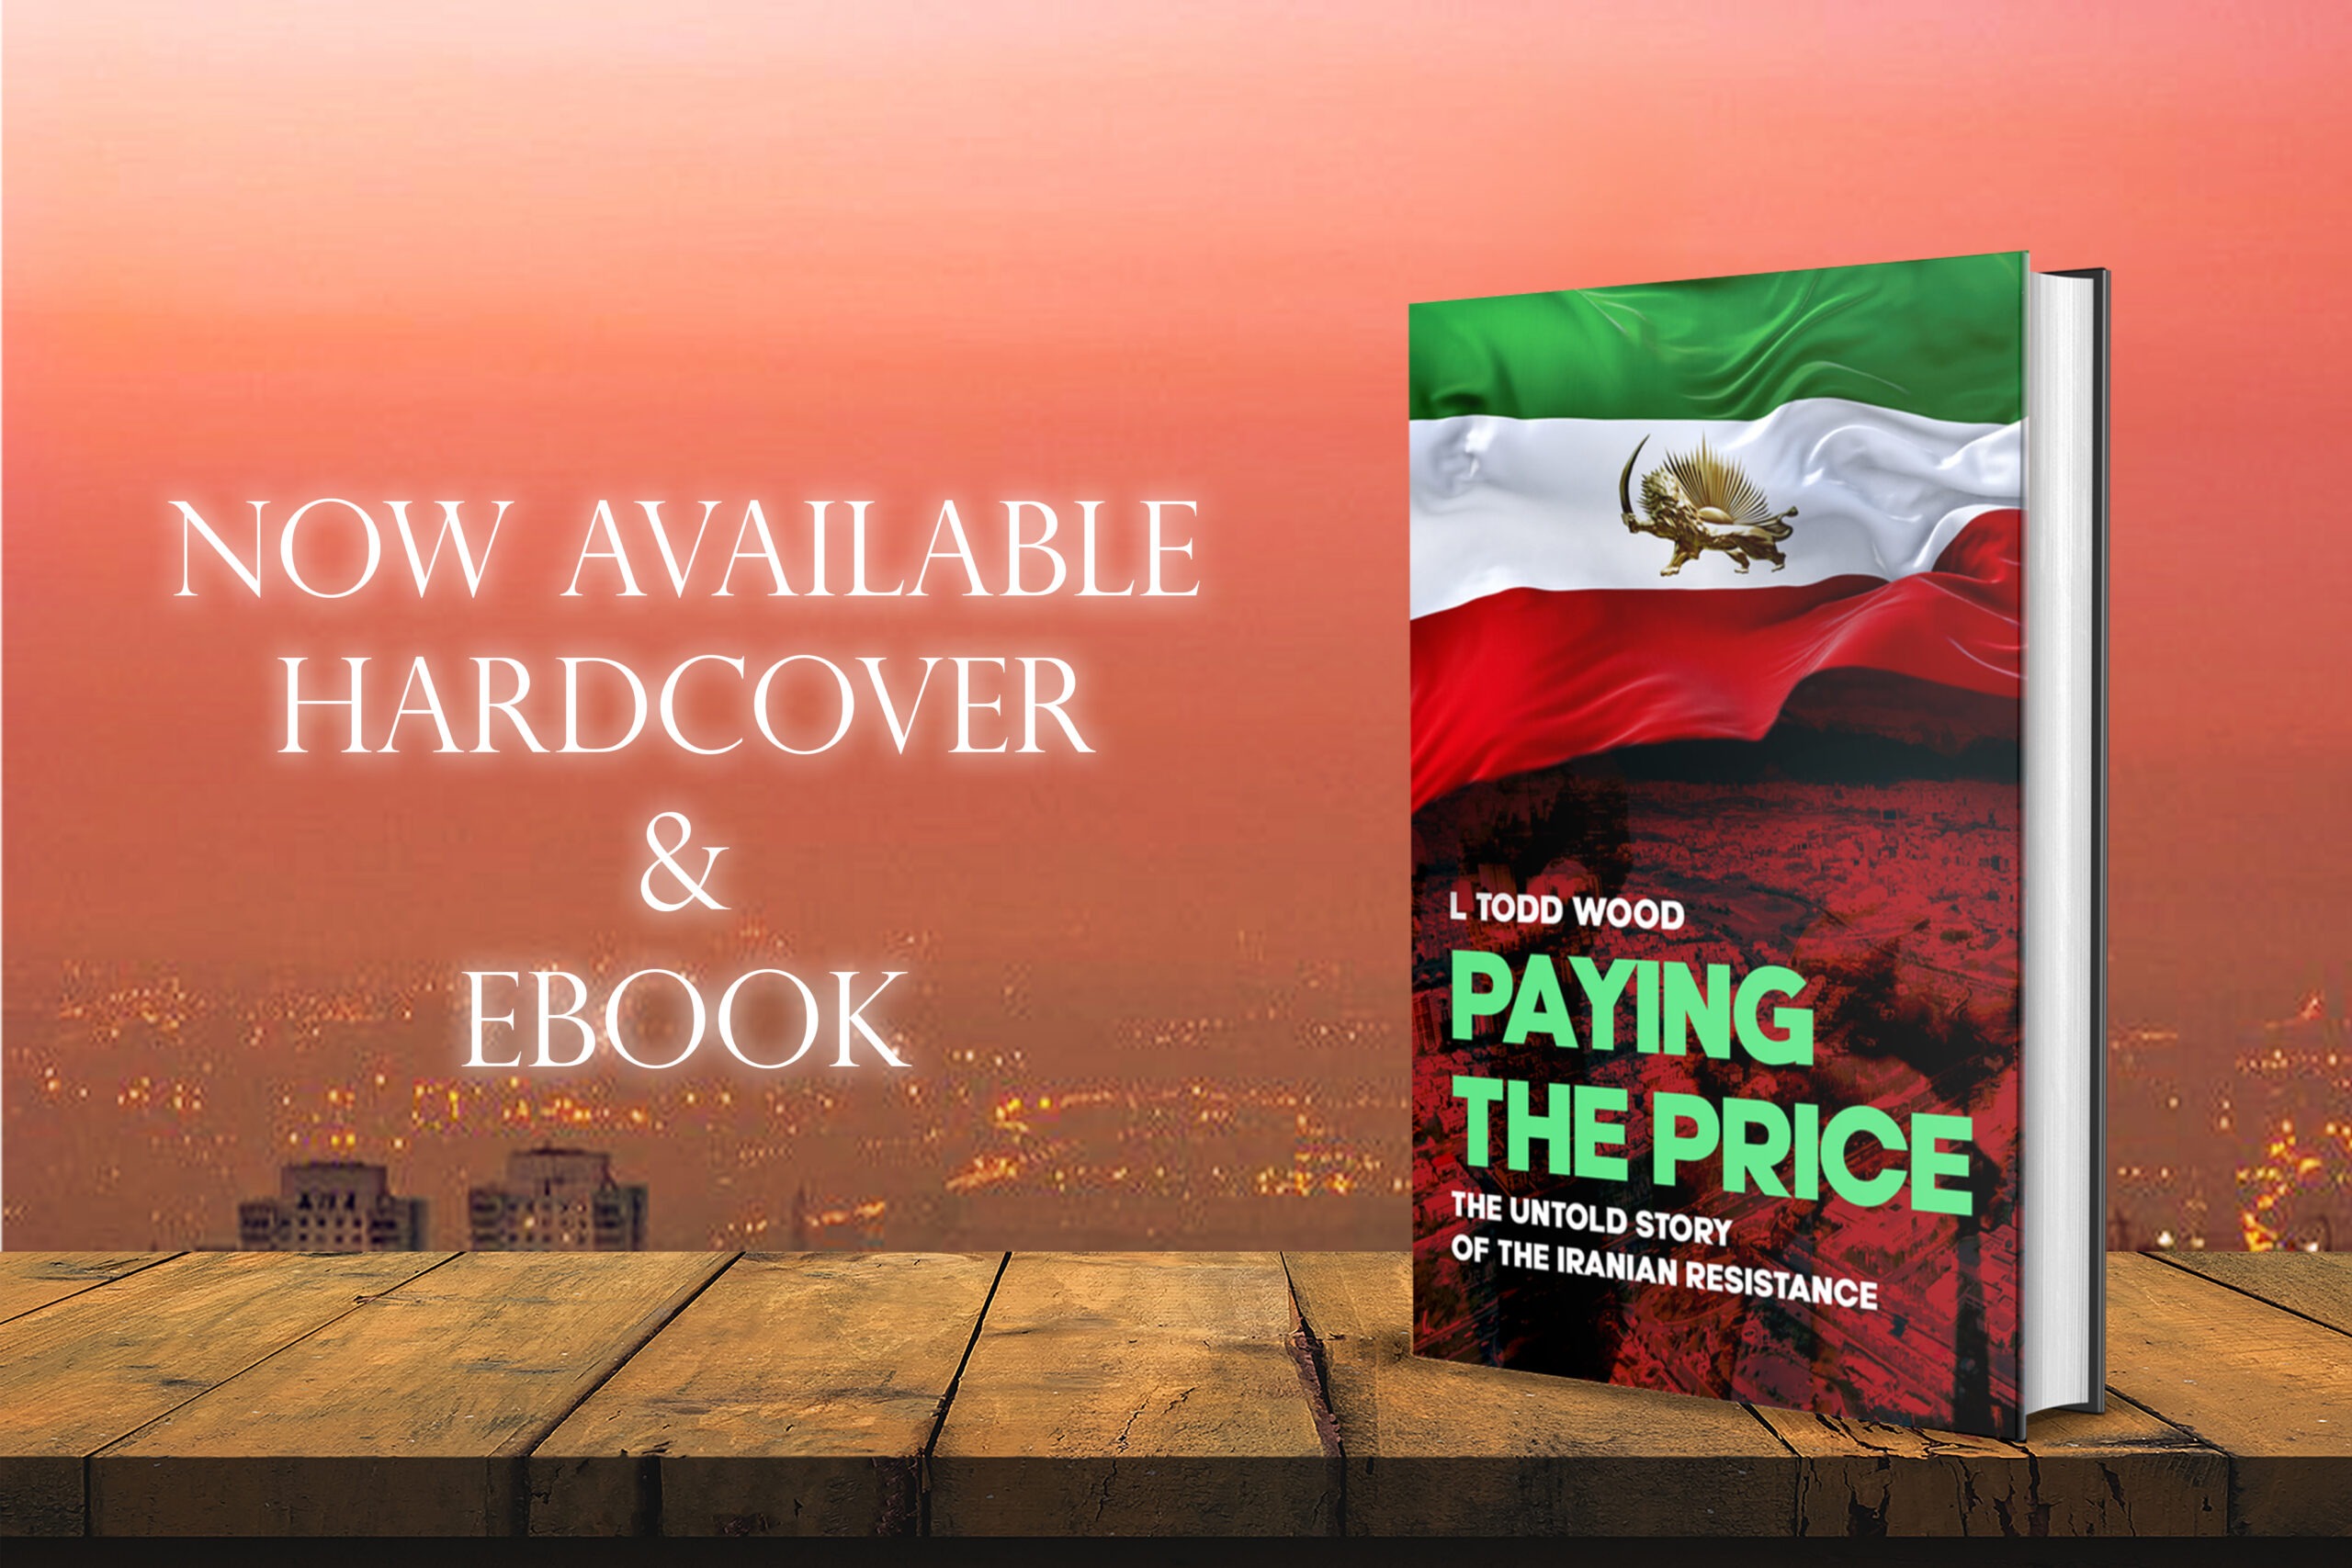 Paying the Price by L Todd Wood, now available from Histria Books